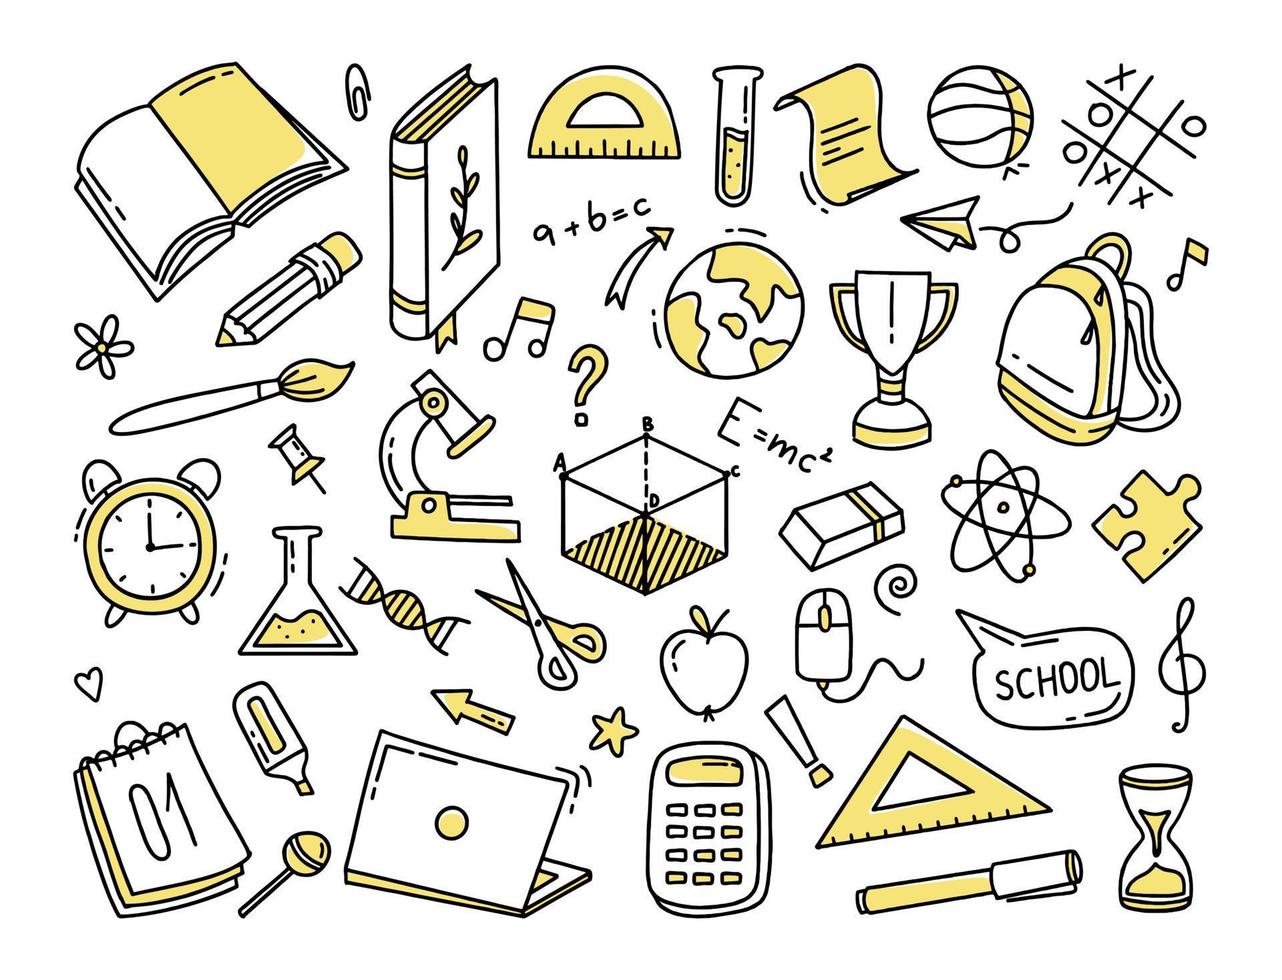 Back to school doodle set of elements. Vector illustration in line style.